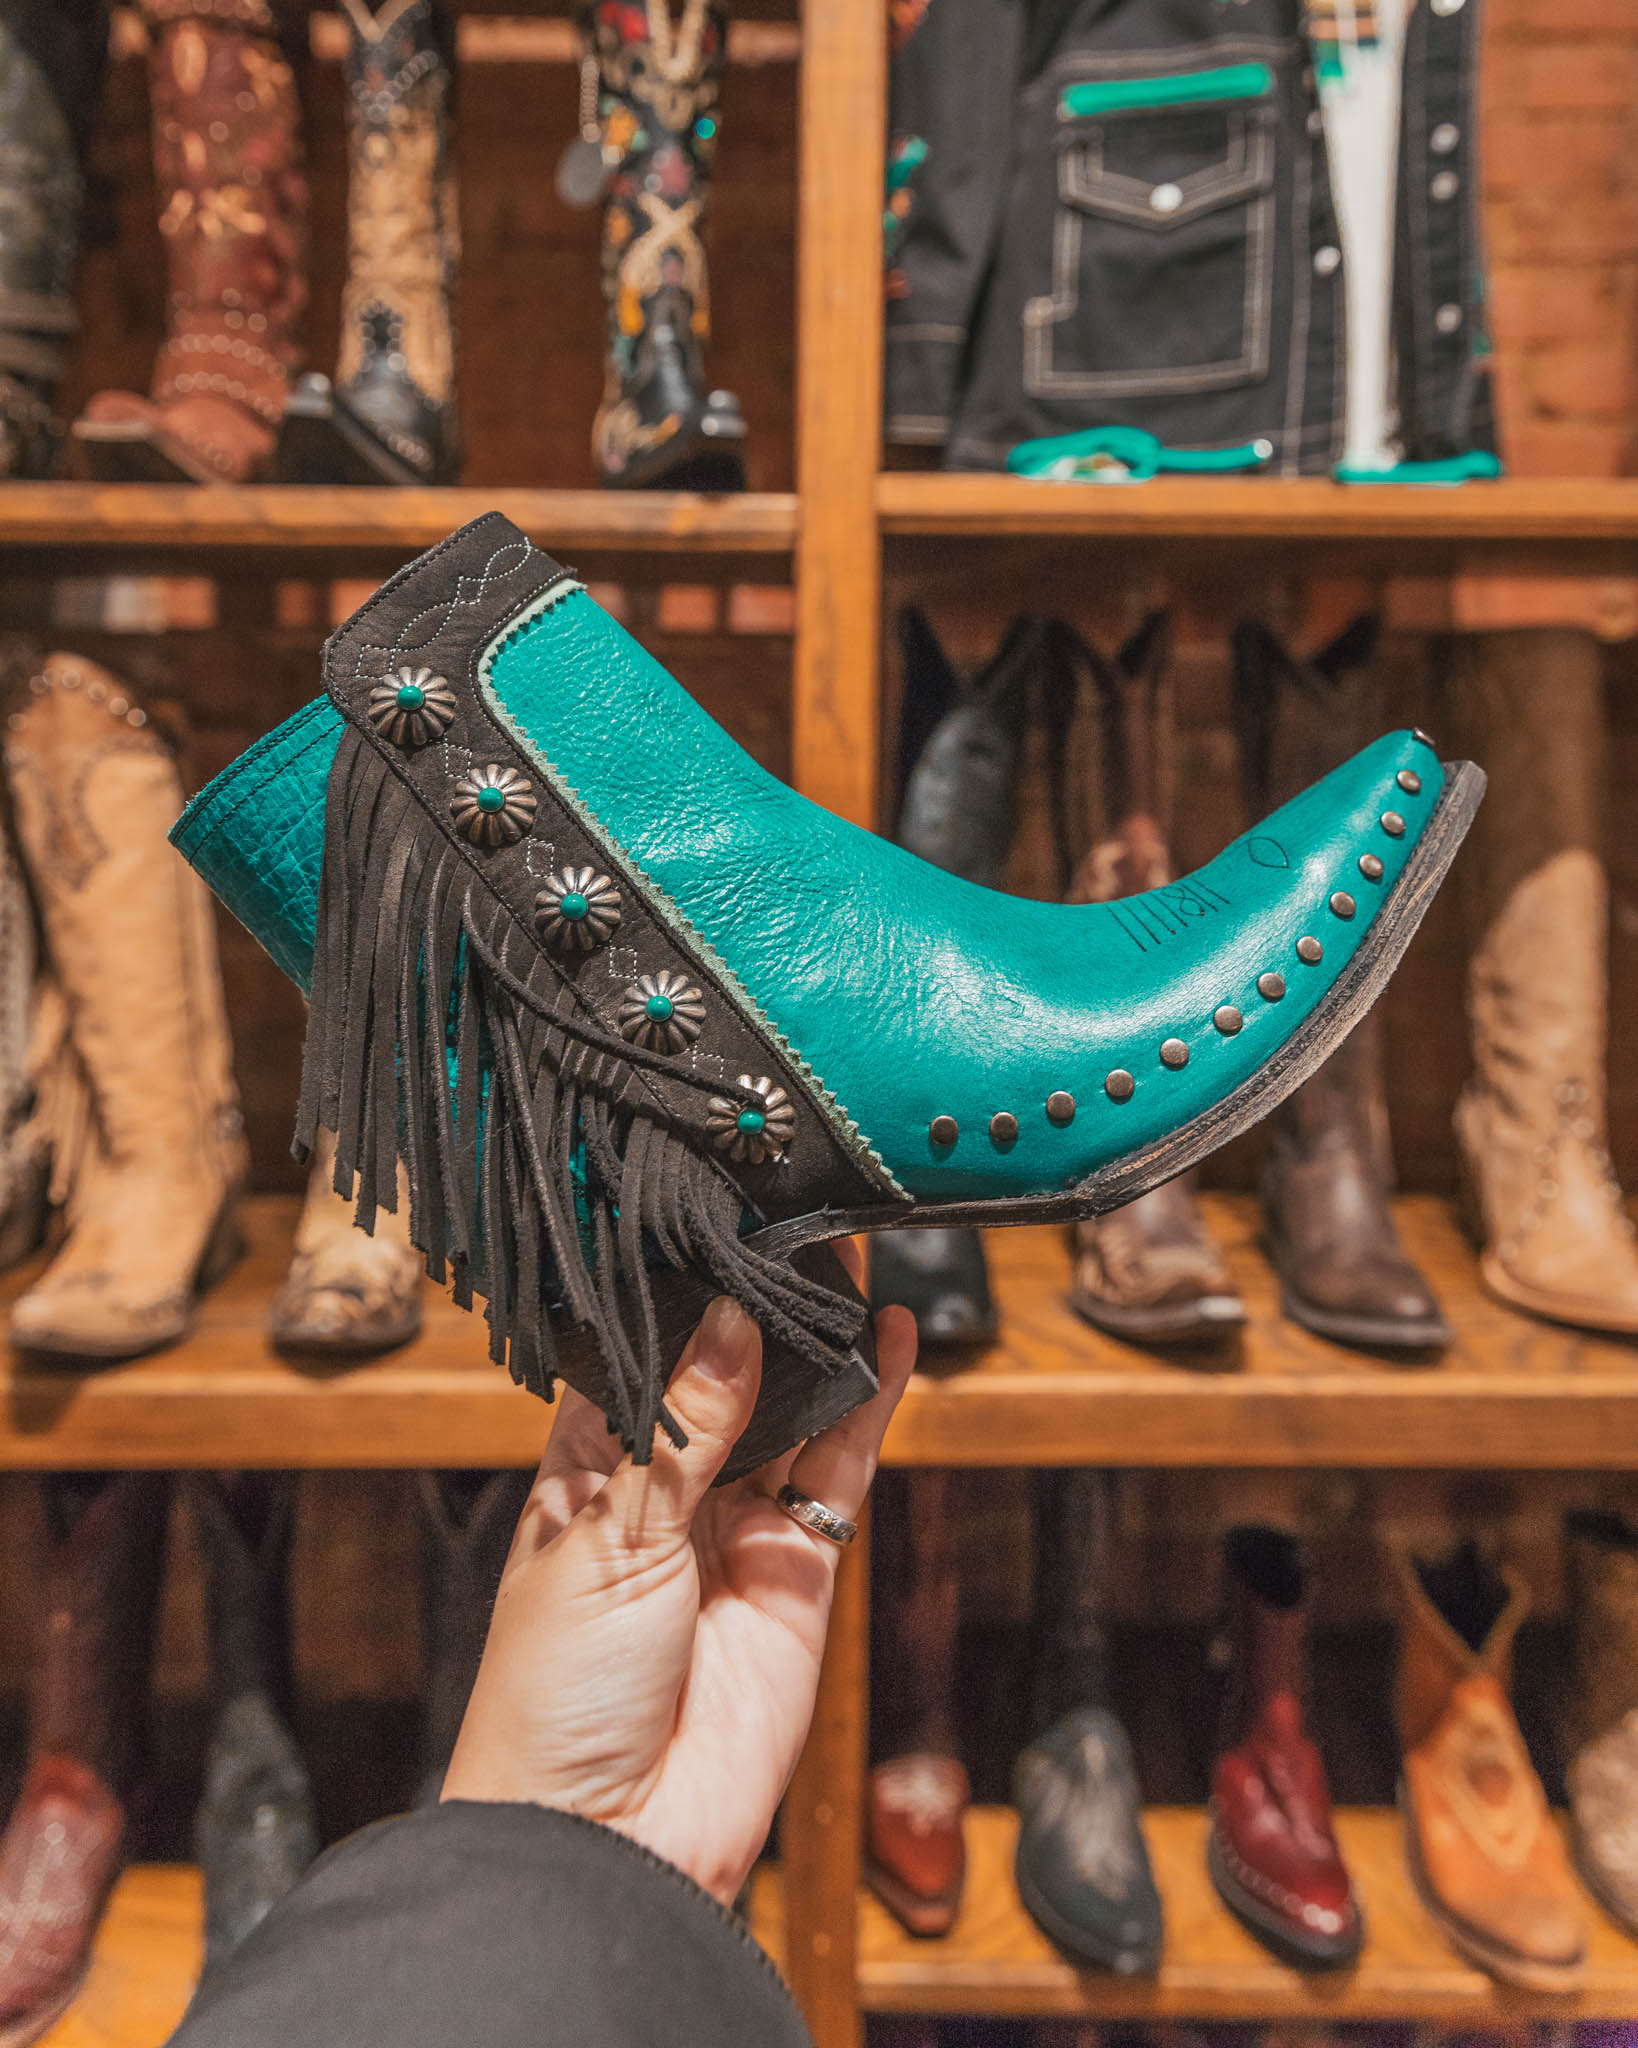 Cowboy boot shopping in the Fort Worth Stockyard for teal boots